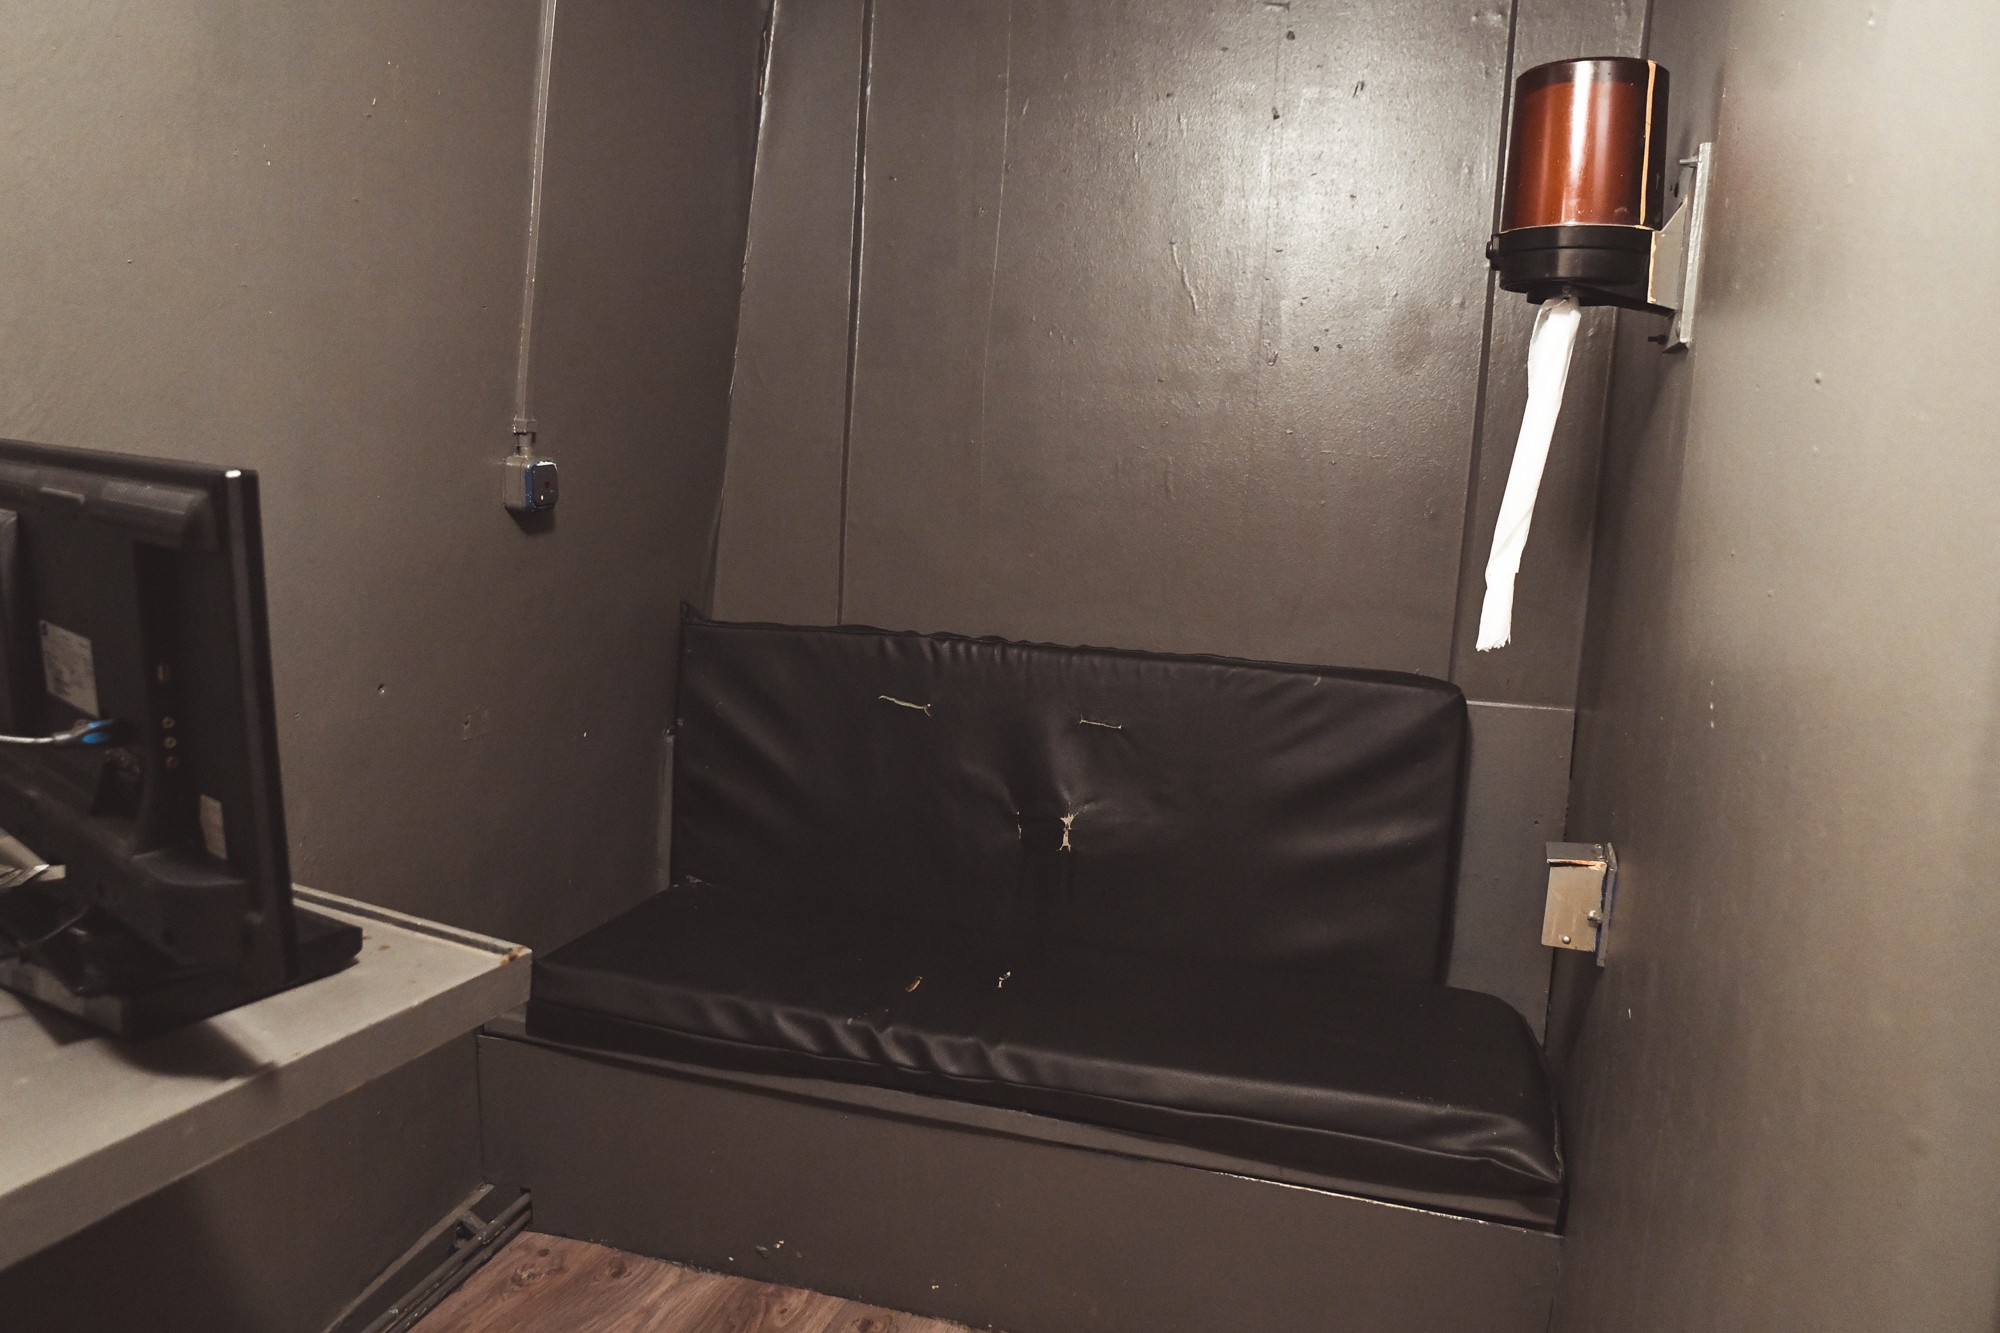 Braooth Room Porn - A Tour of the Last Wanking Booths in the Netherlands